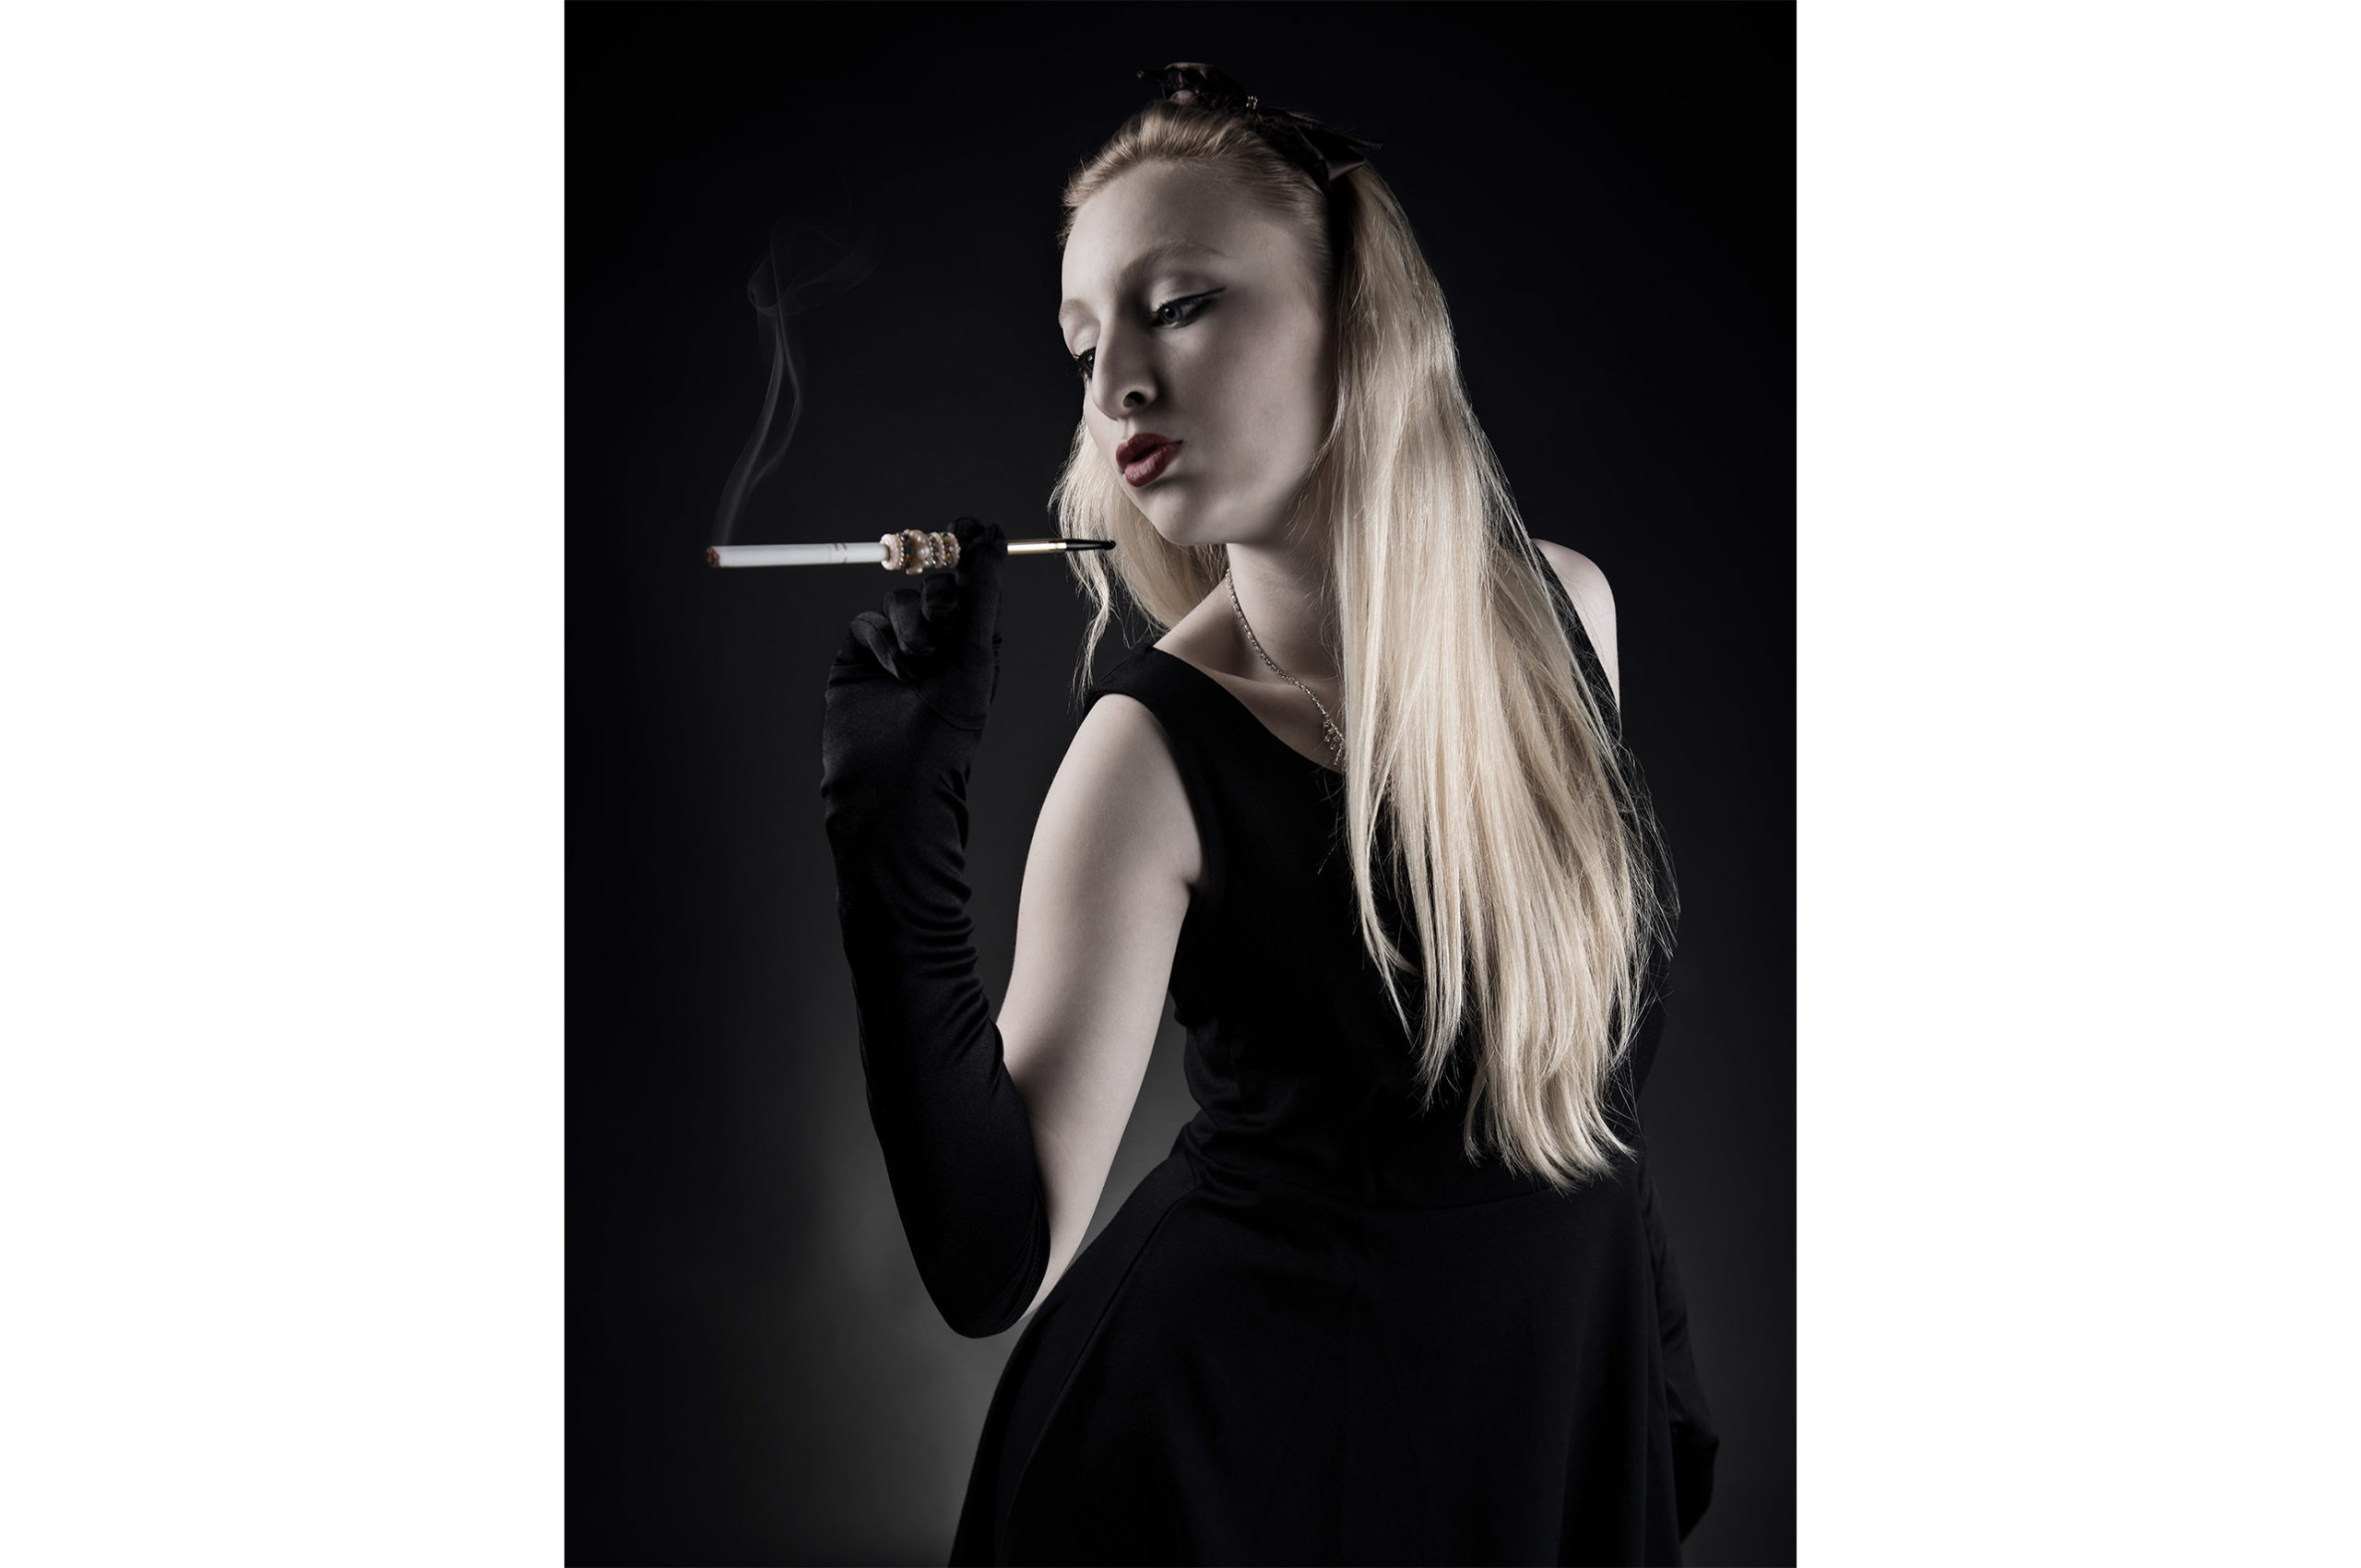 (After Editing) Photograph of model with long cigarette and black dress